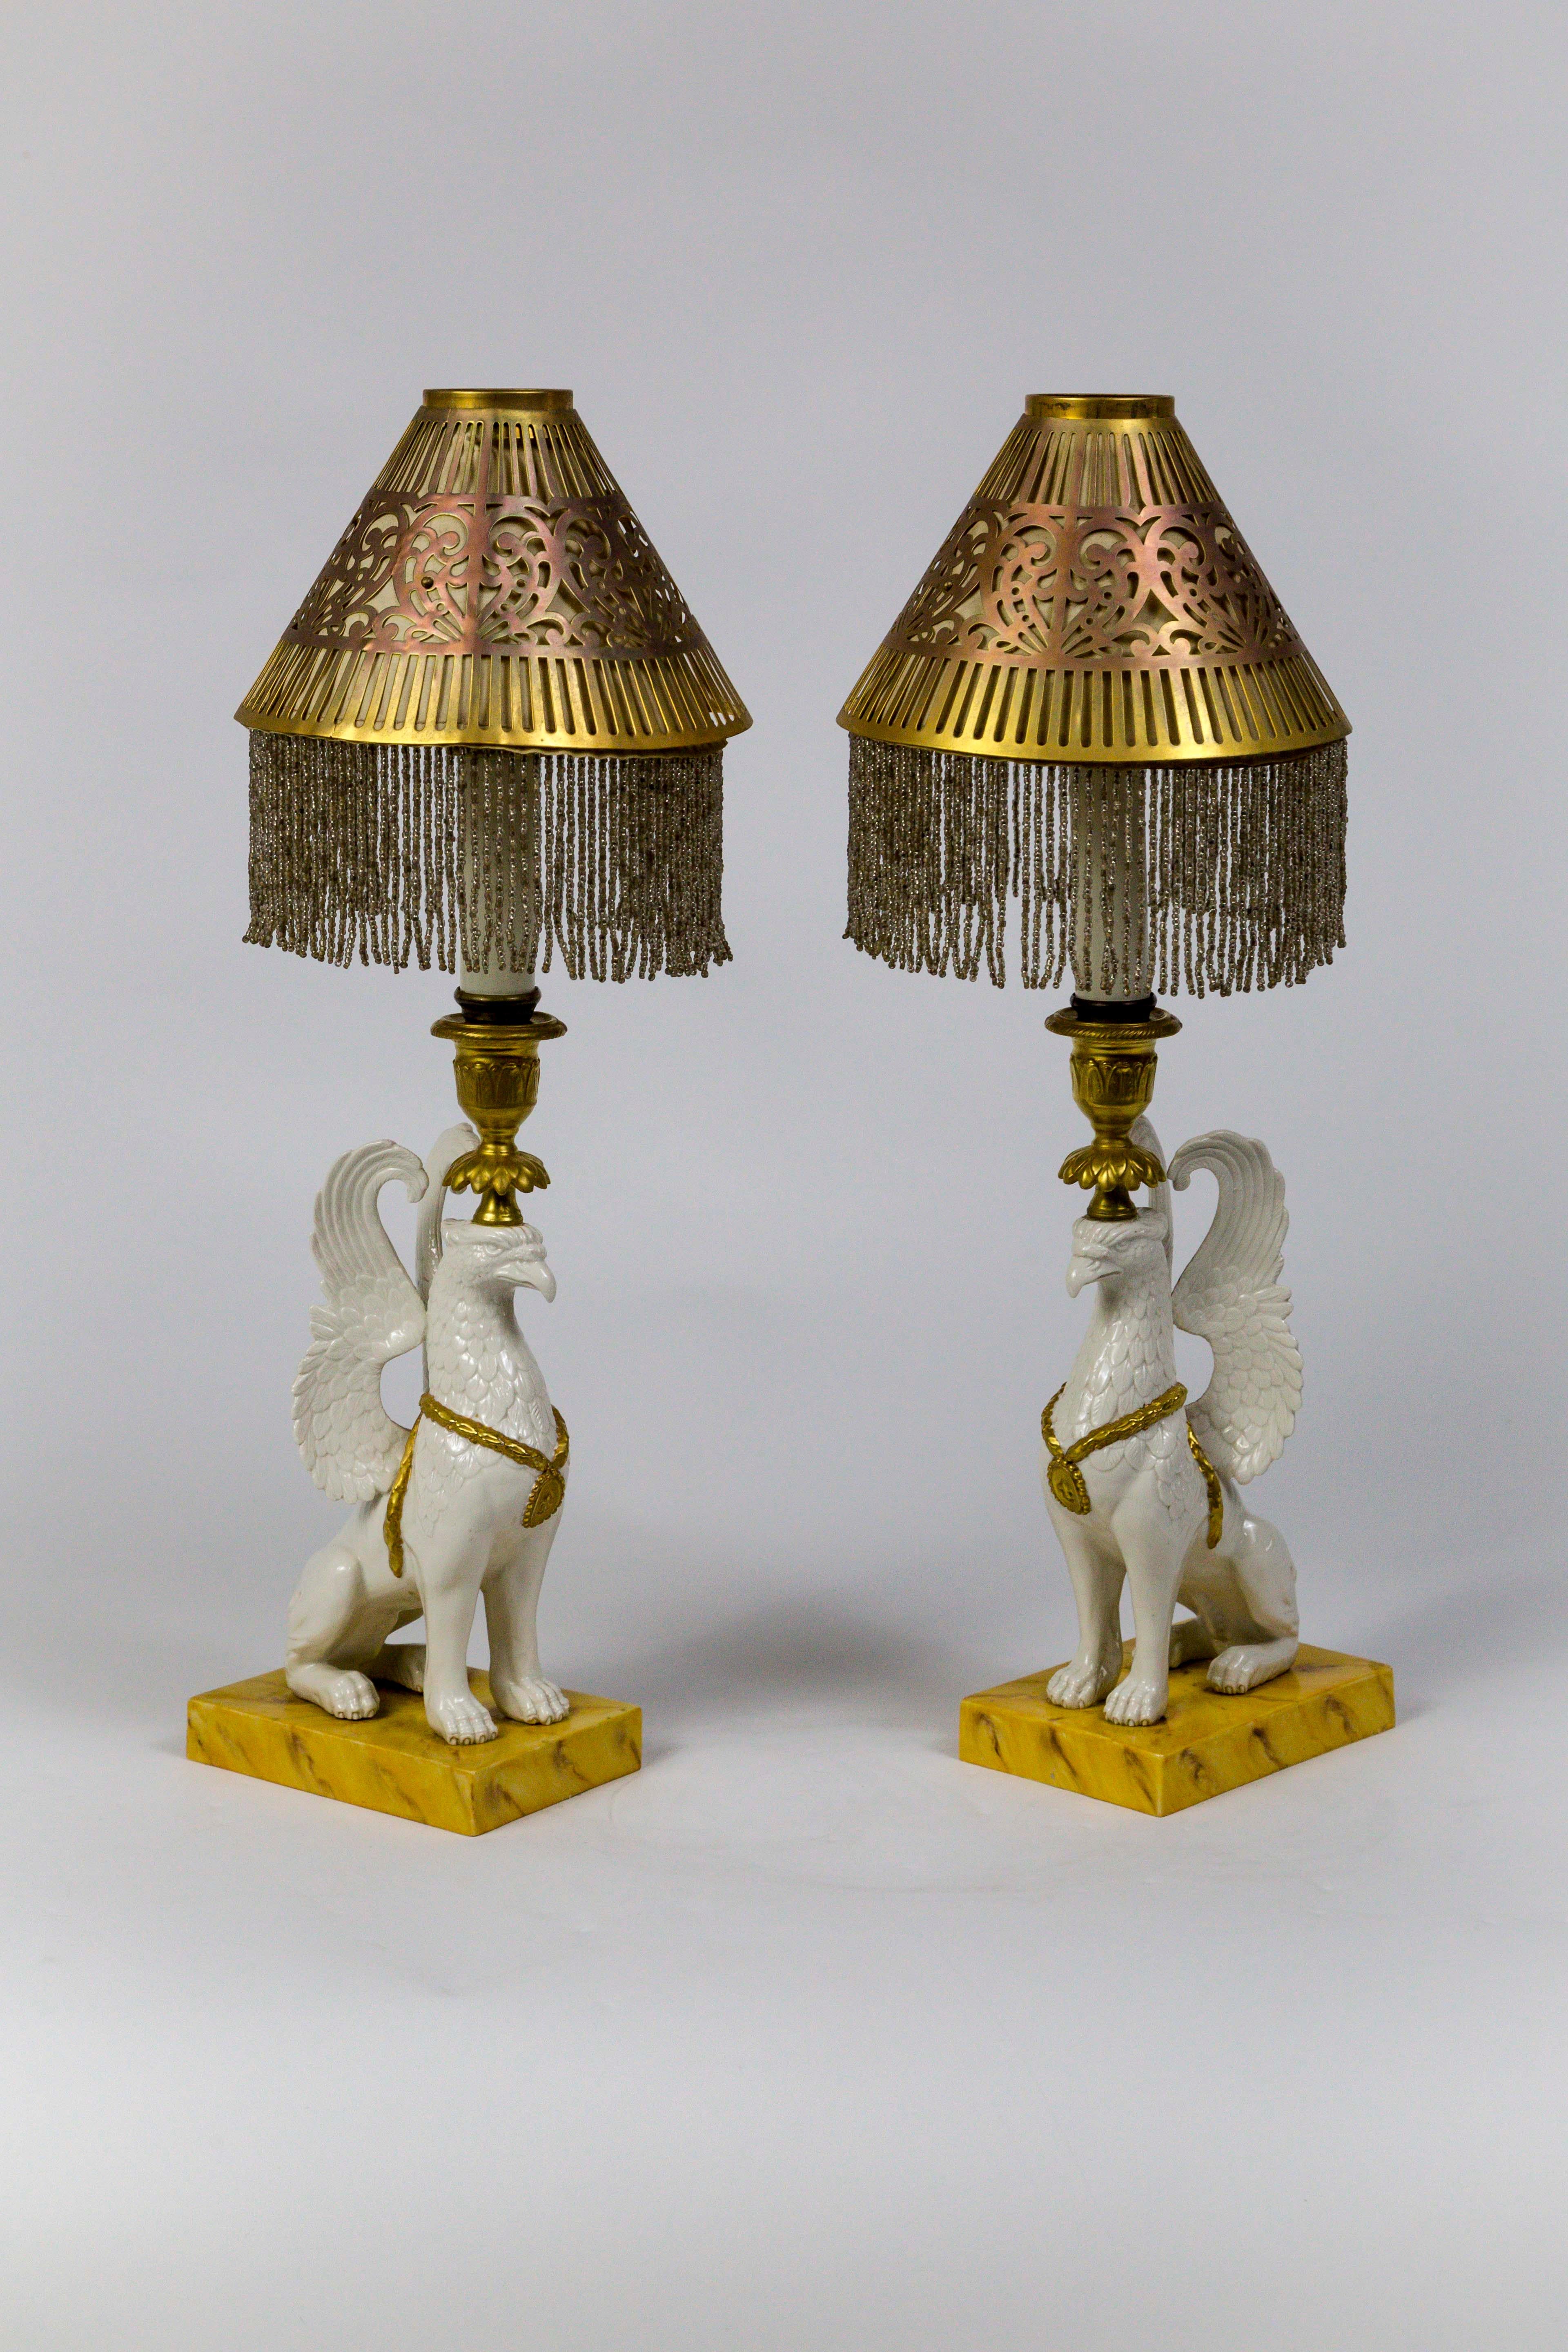 Finely crafted Porcellane d'Arte from Bassano del Grappa, Italy; hand painted, porcelain, urn crowned Griffin sculptures on gold painted bases as push-up candlesticks. Topped with brass shades with some copper tinting; empire shaped and trimmed with